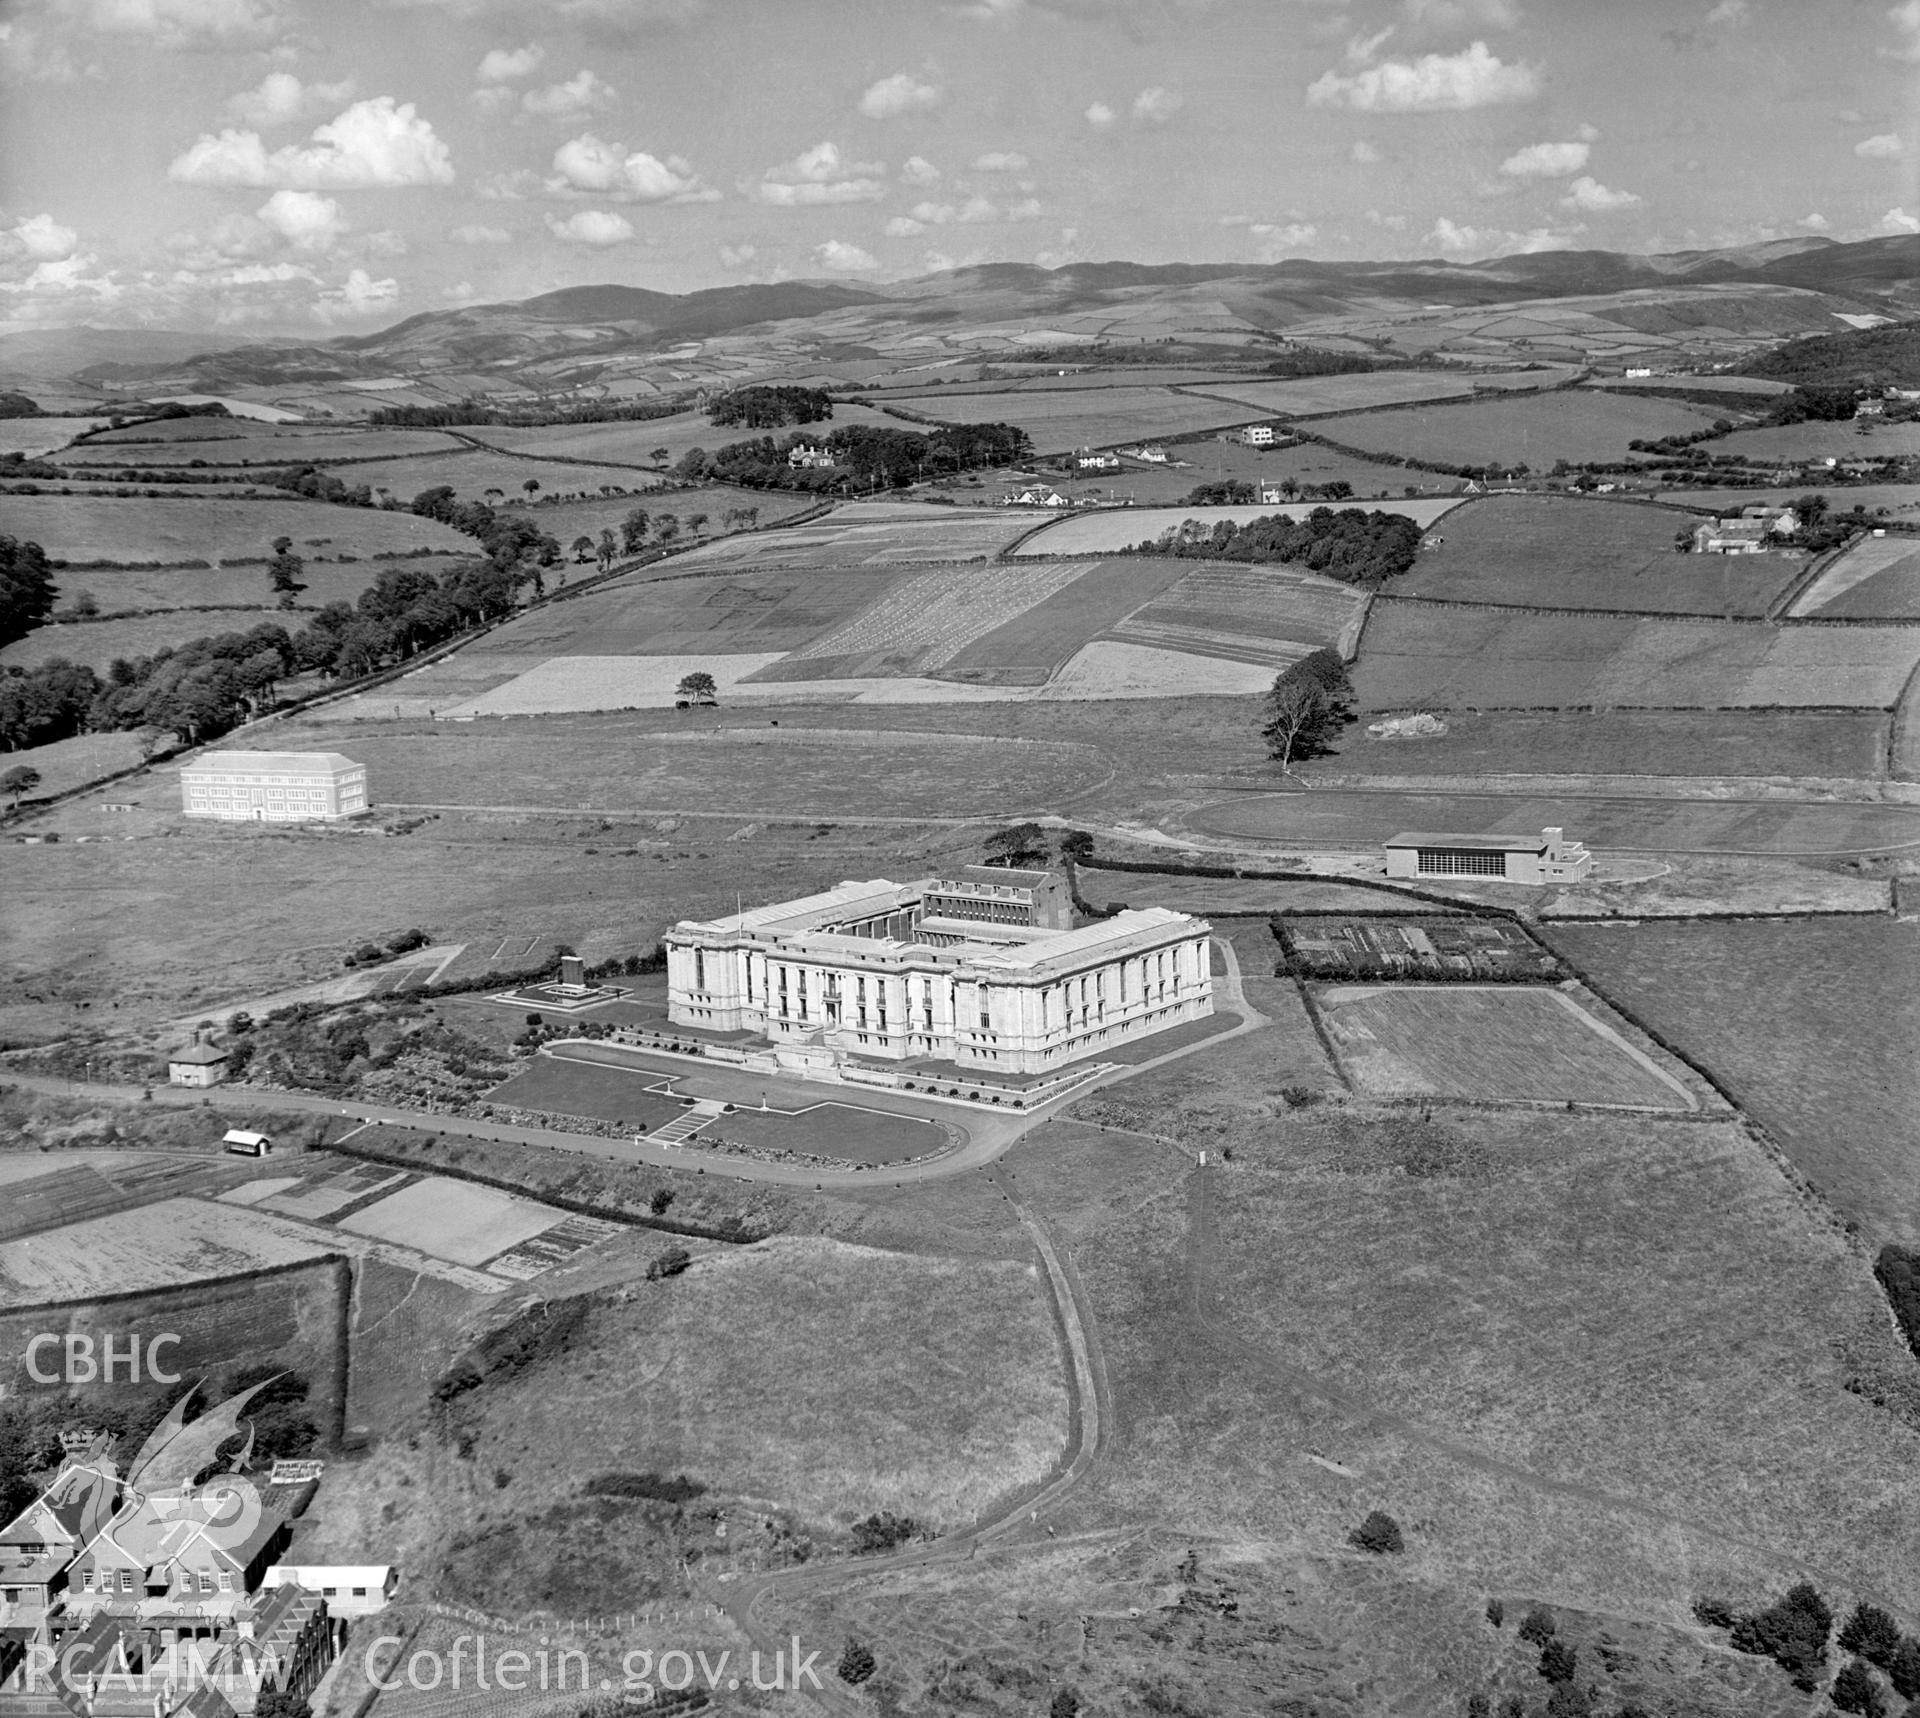 Black and white oblique aerial photograph showing the National Library of Wales, Aberystwyth, from Aerofilms album 393 (Cardiganshire), taken by Aero Pictorial Ltd and dated 27 July 1947.